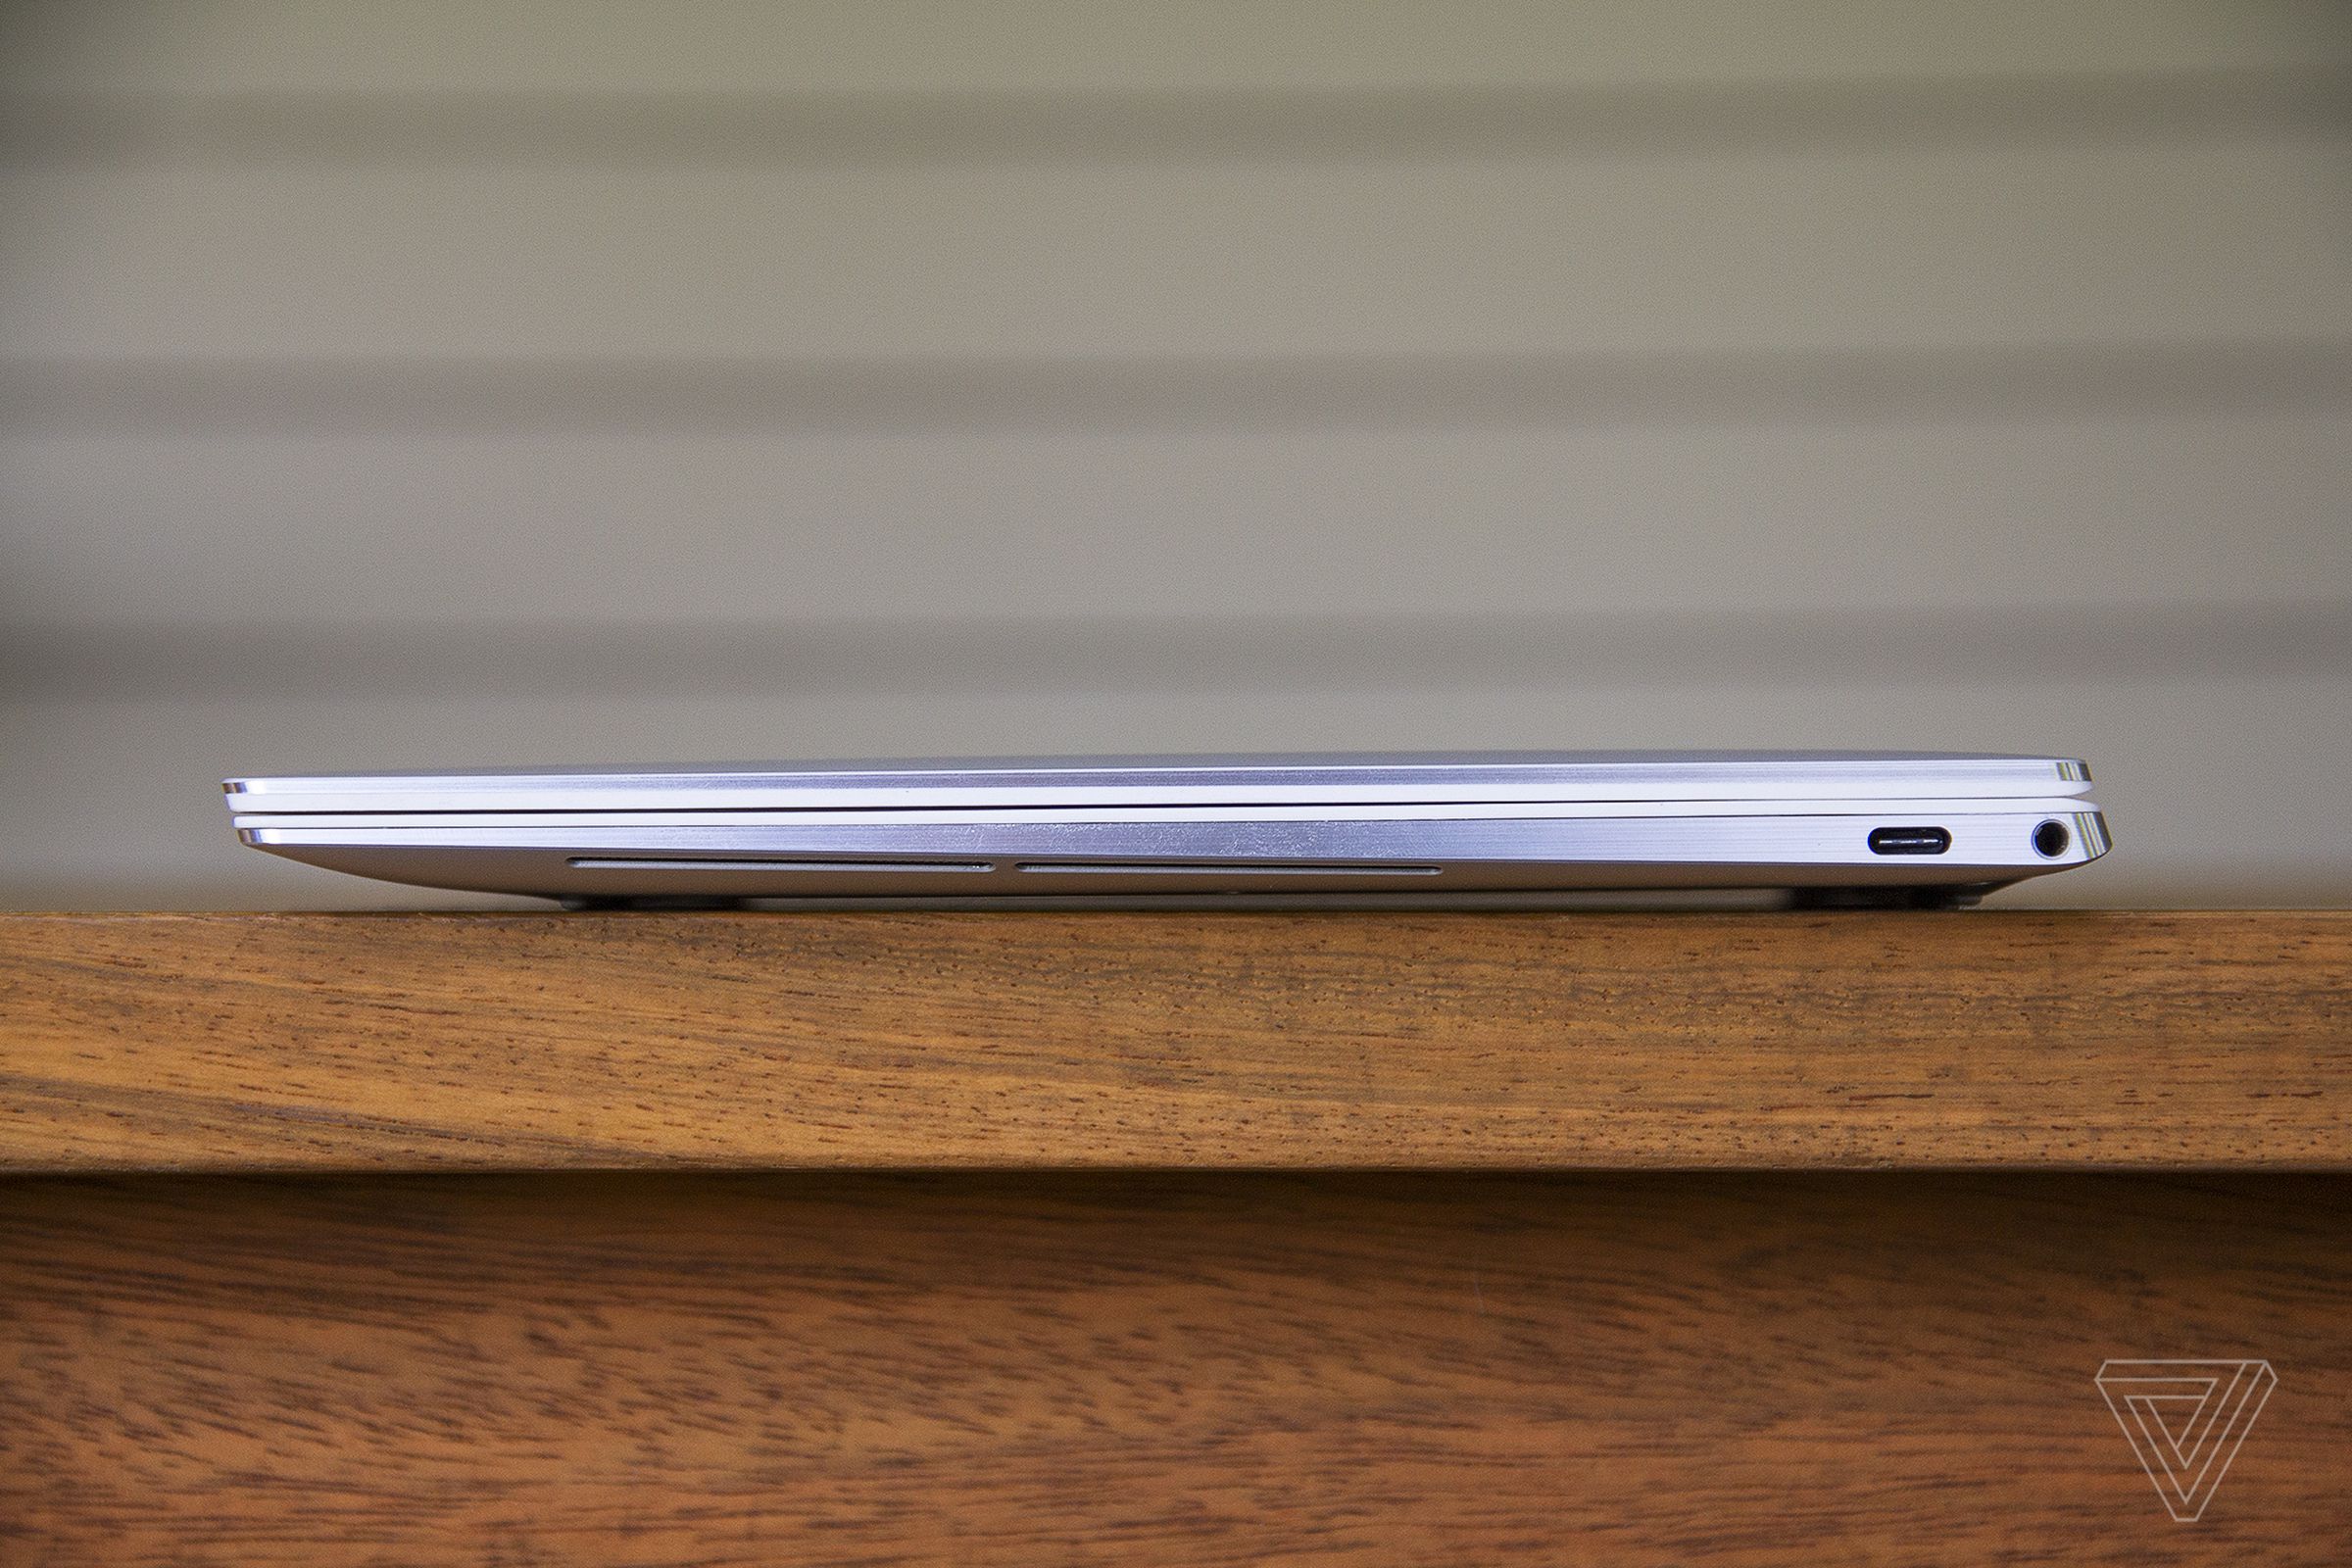 The Dell XPS 13 OLED closed seen from the left side on a wooden table.